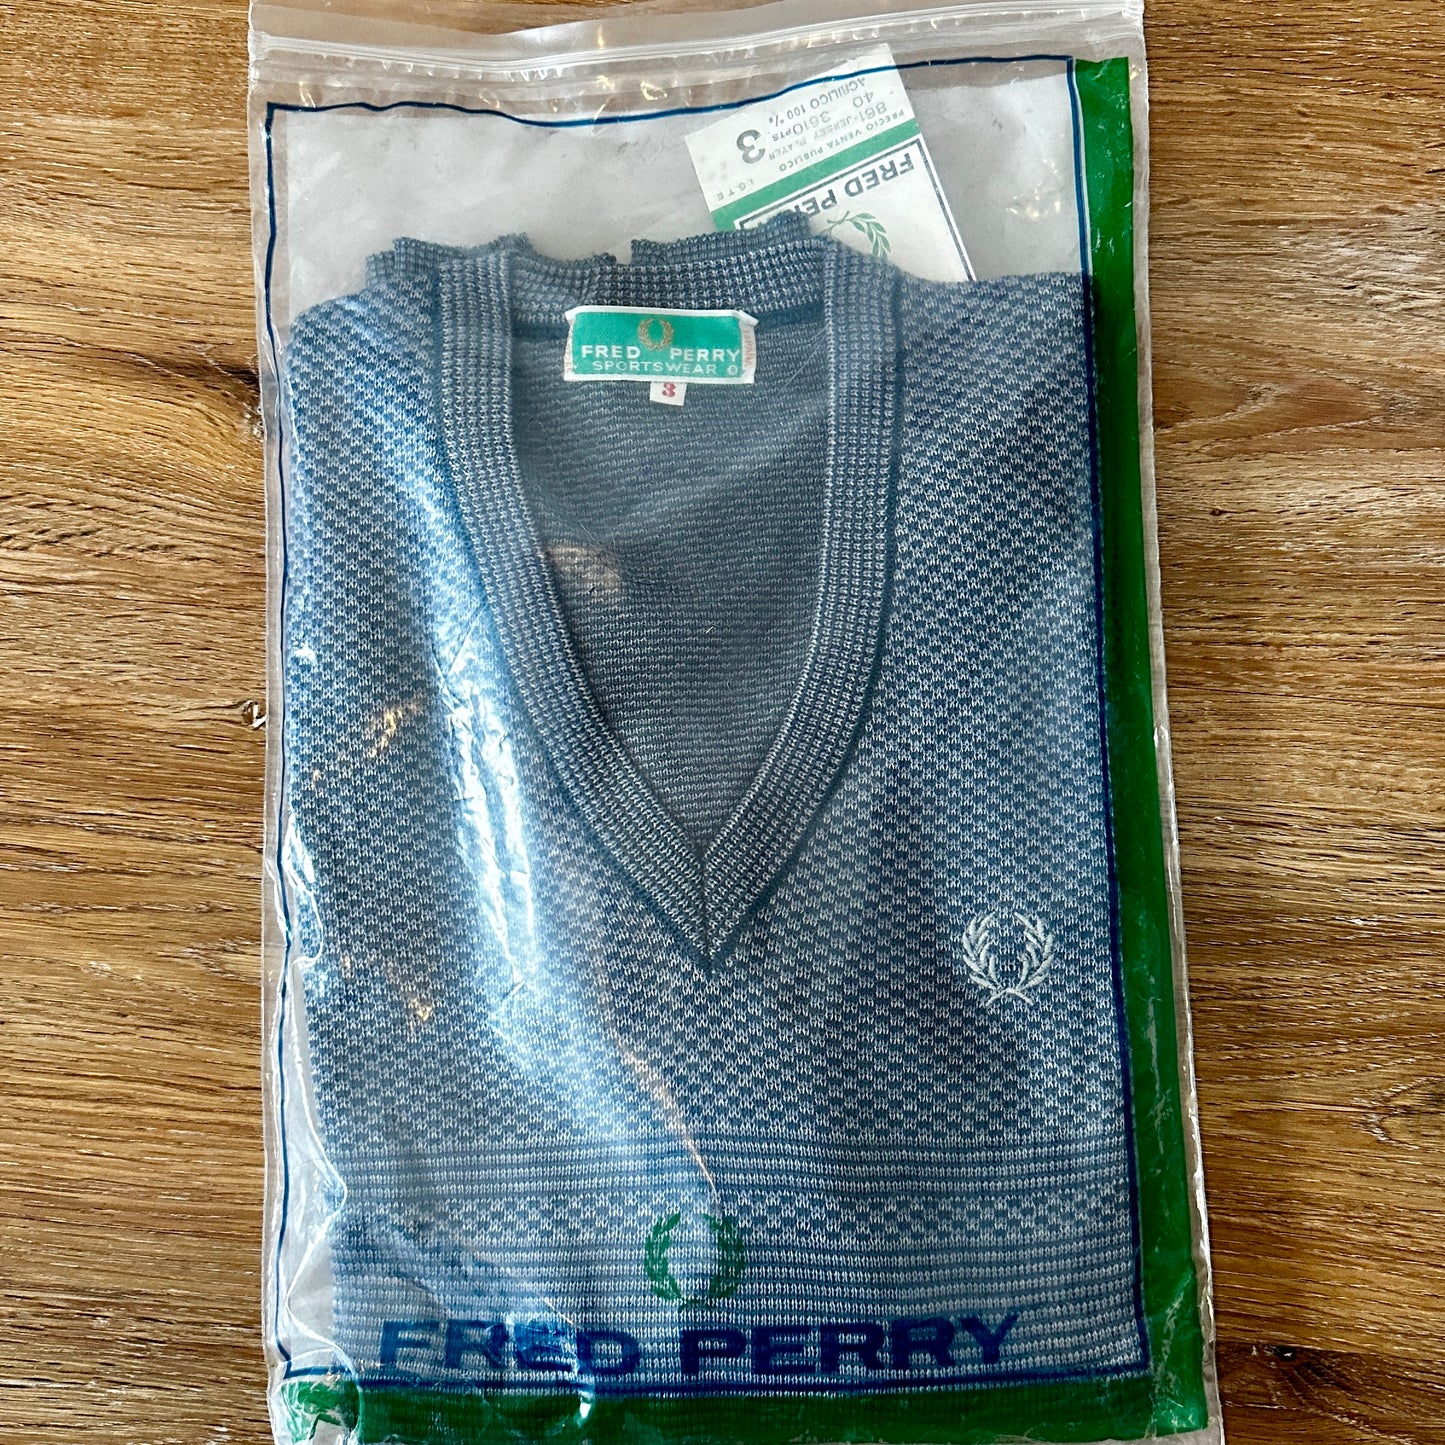 Fred Perry Vintage 80 V-Neck Knit Sweater - Deadstock - 3 / M - Made in Spain